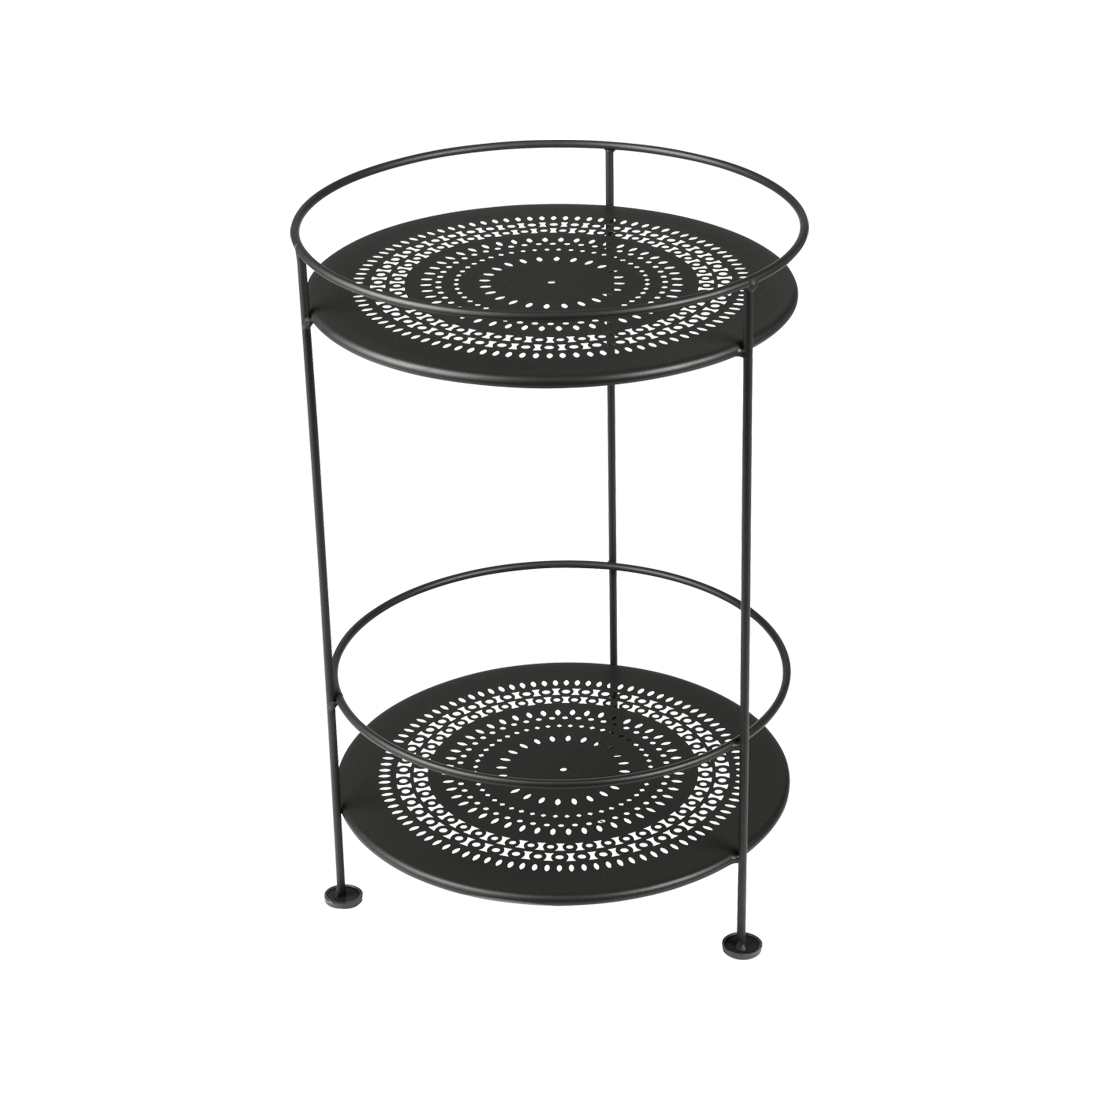 Guinguette Side Table with Perforated Top